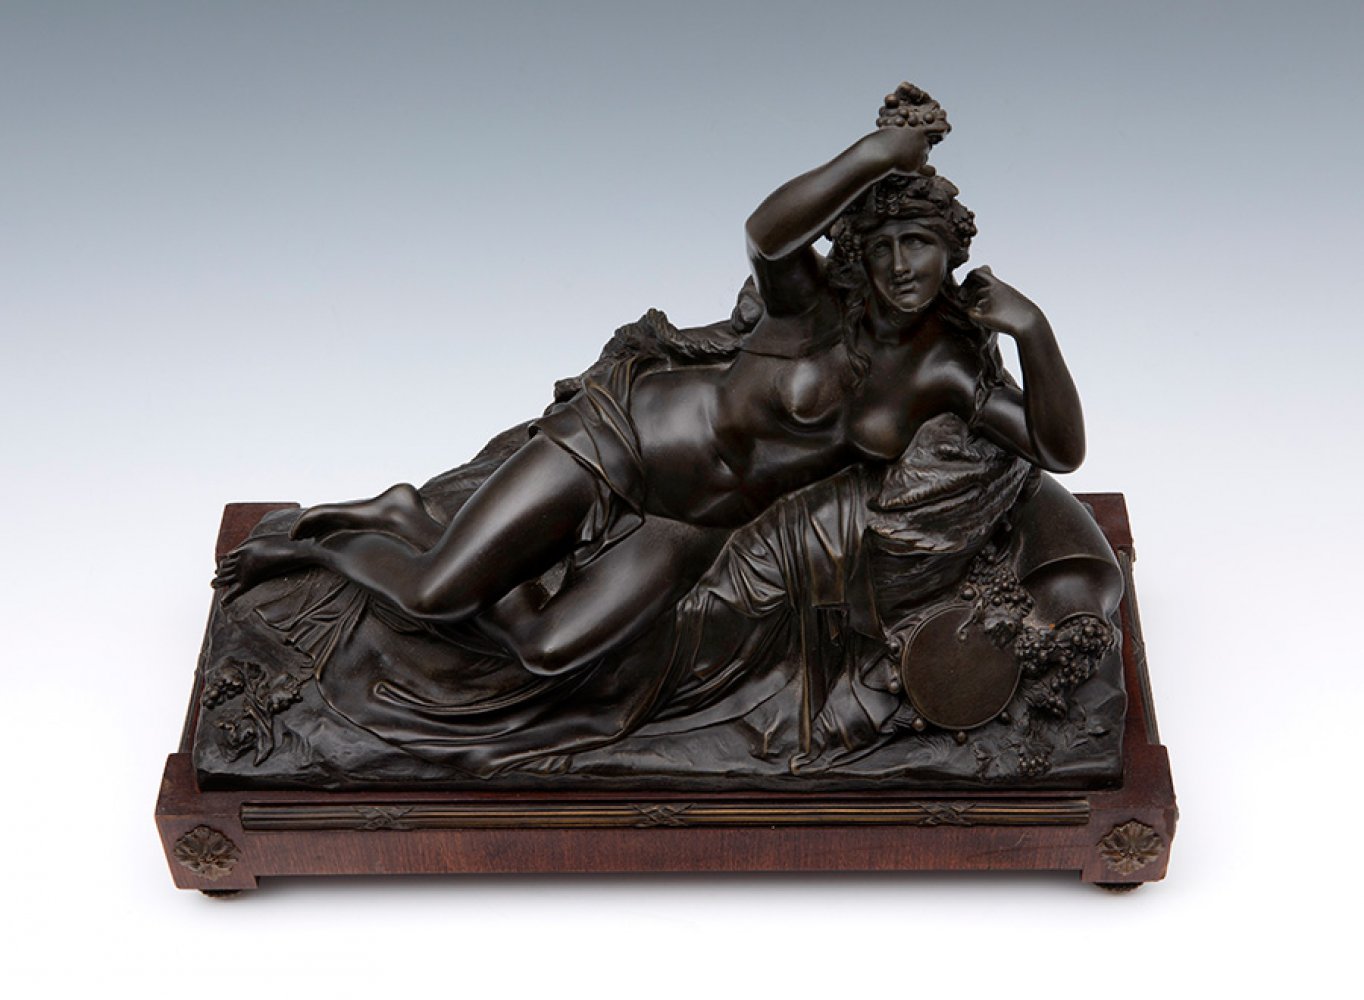 French or Italian school, mid-19th century."Allegory of Autumn".Patinated bronze. Wooden base. - Image 4 of 5